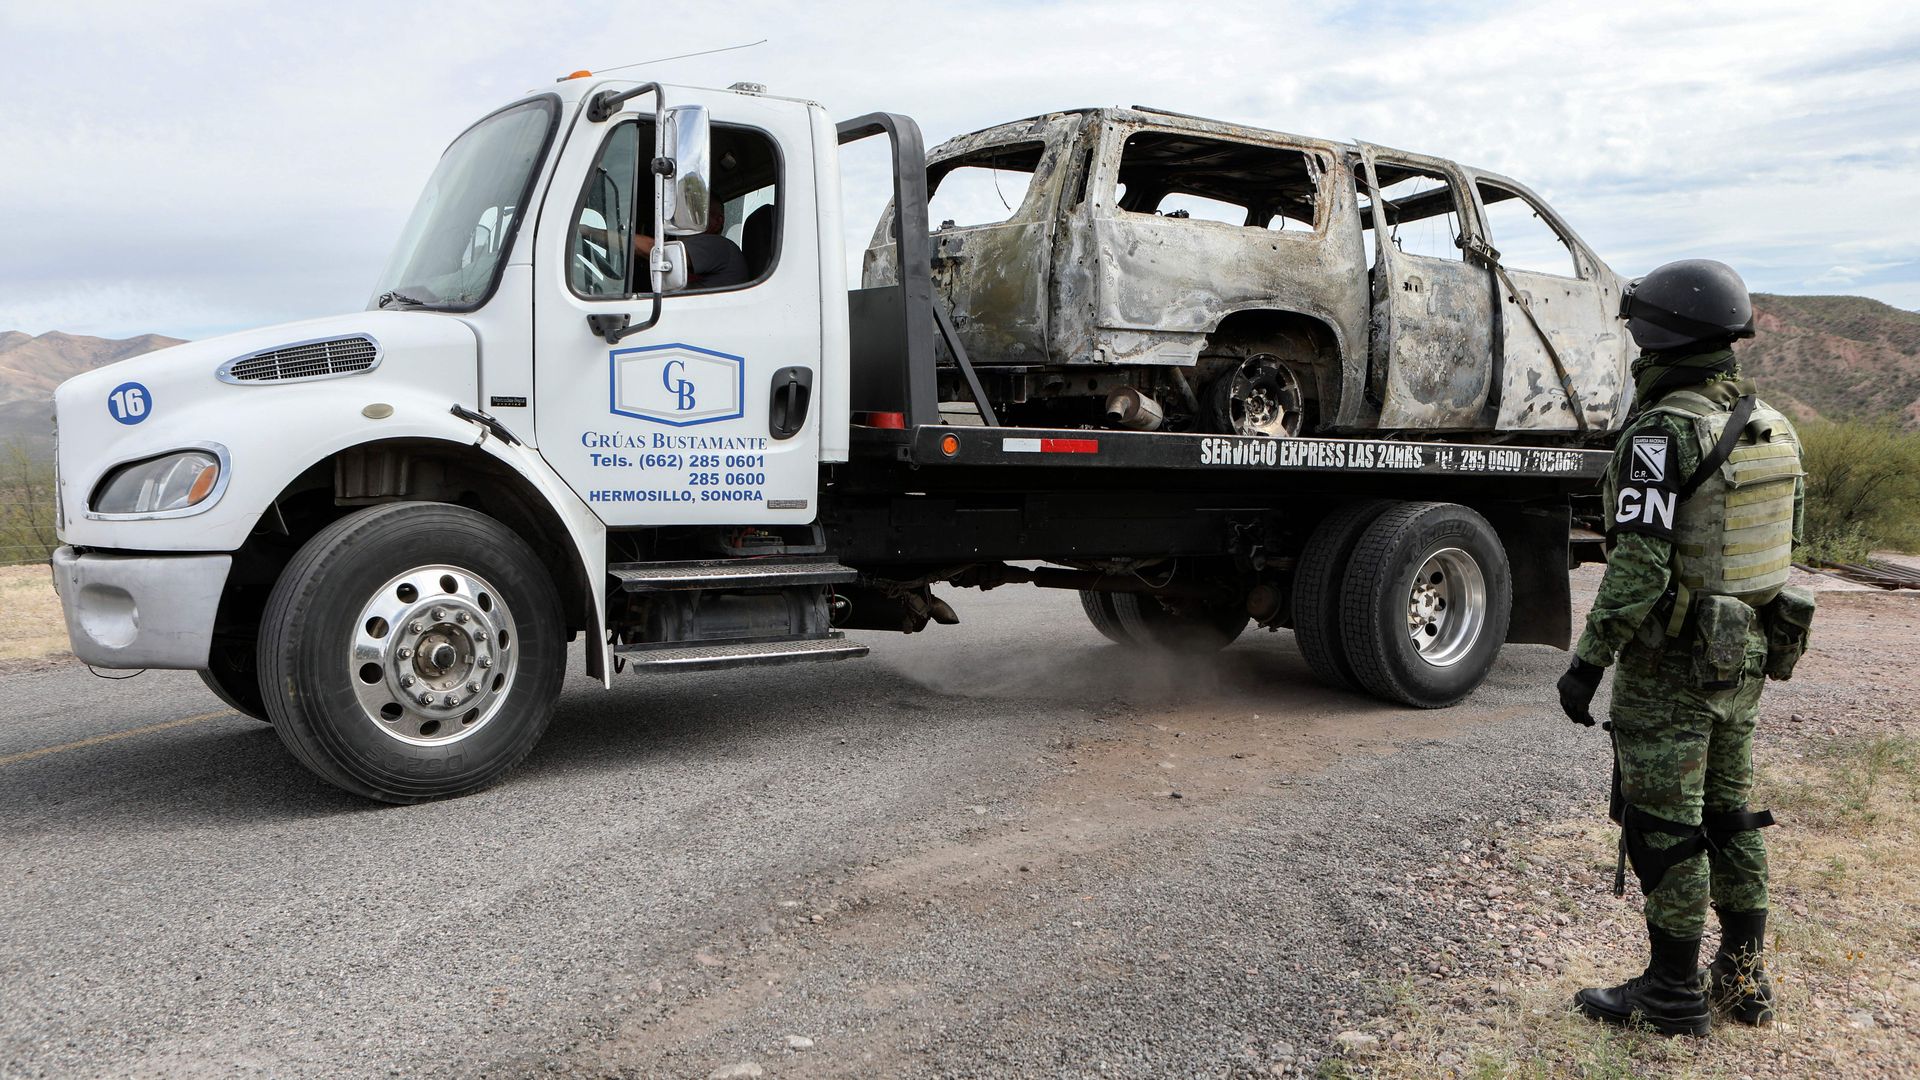 A worker lifts to the tow truck the burnt van where five of the nine members of the Mexican-American LeBaron family were killed, in the Sonora mountain range, Mexico, on November 6